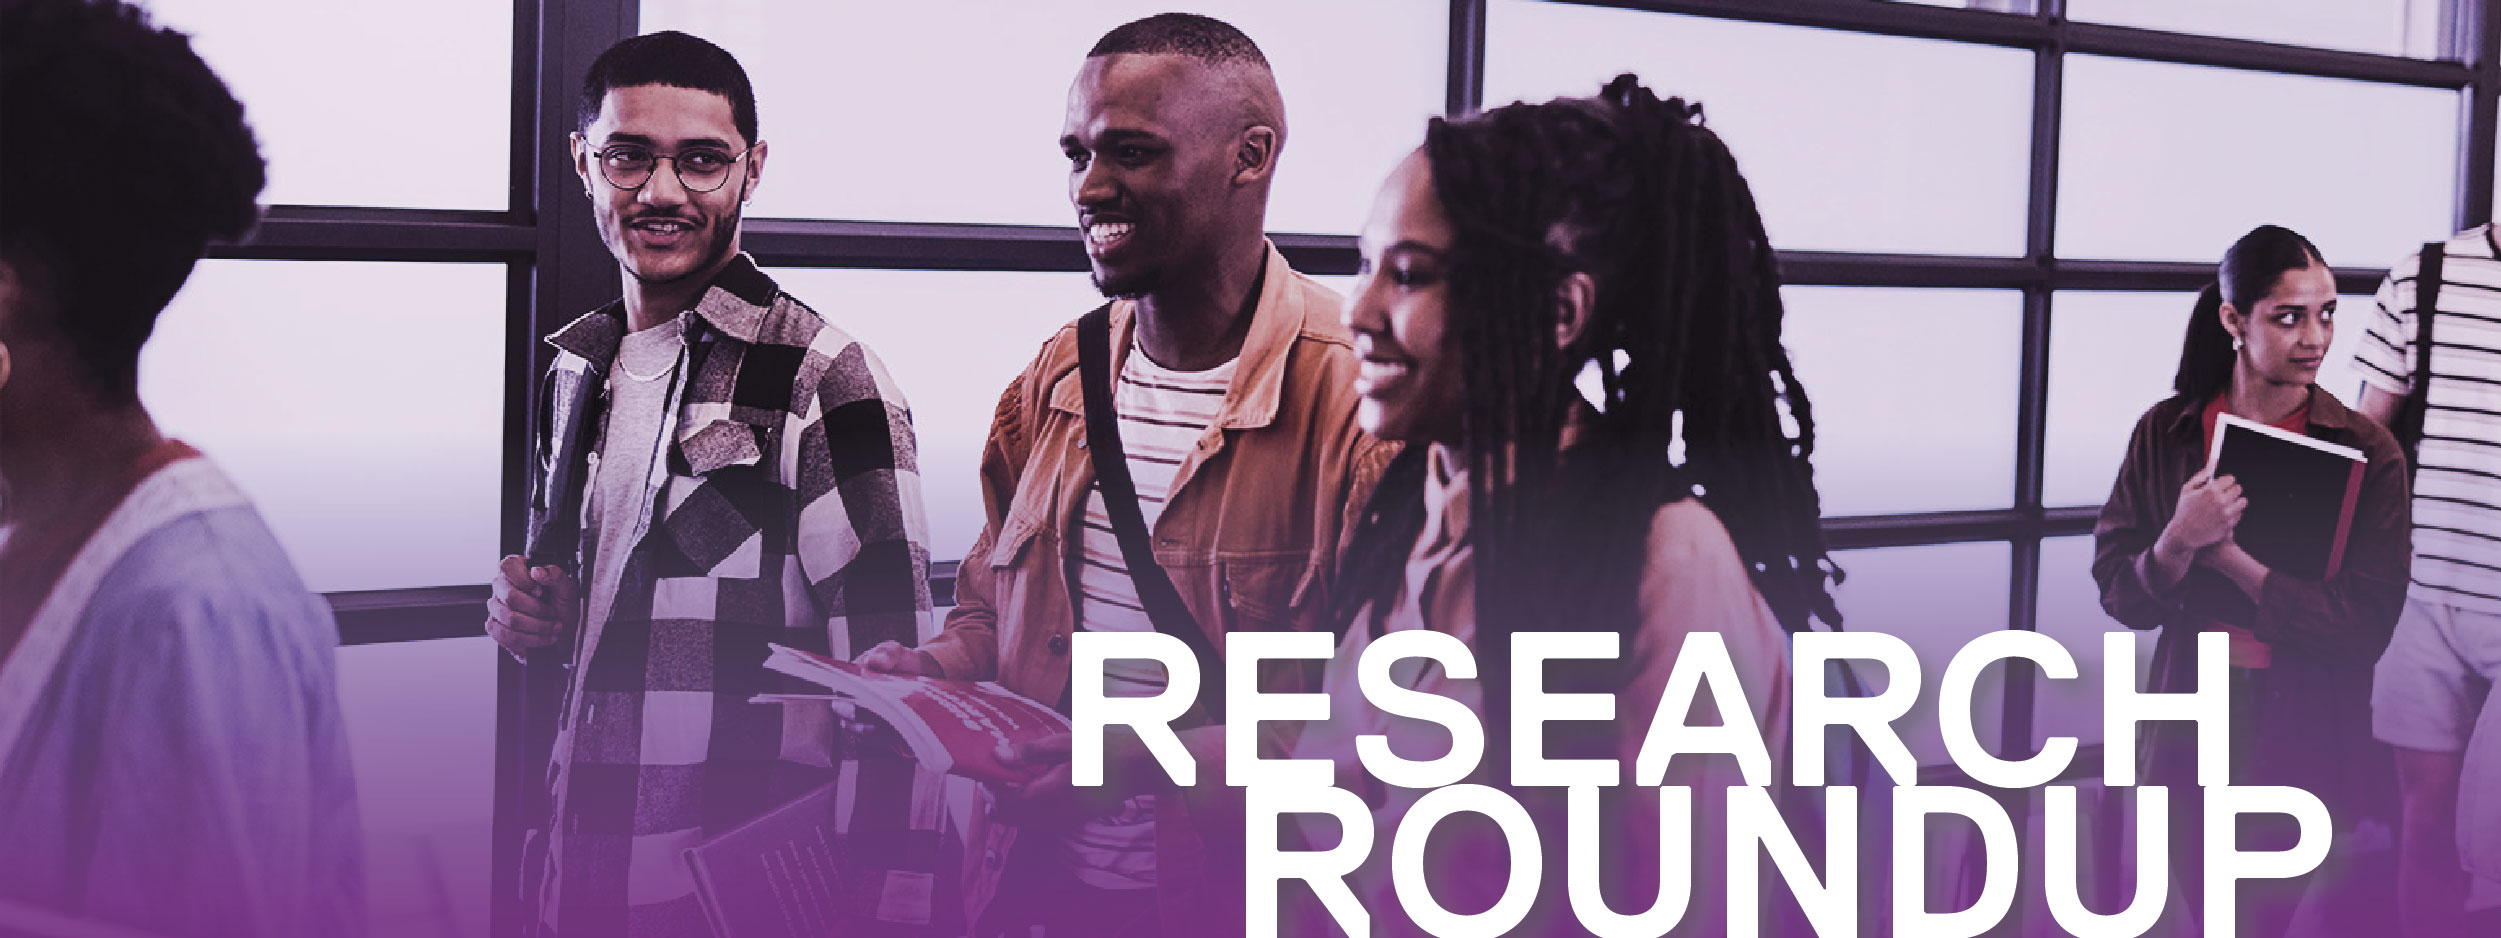 Research Roundup banner